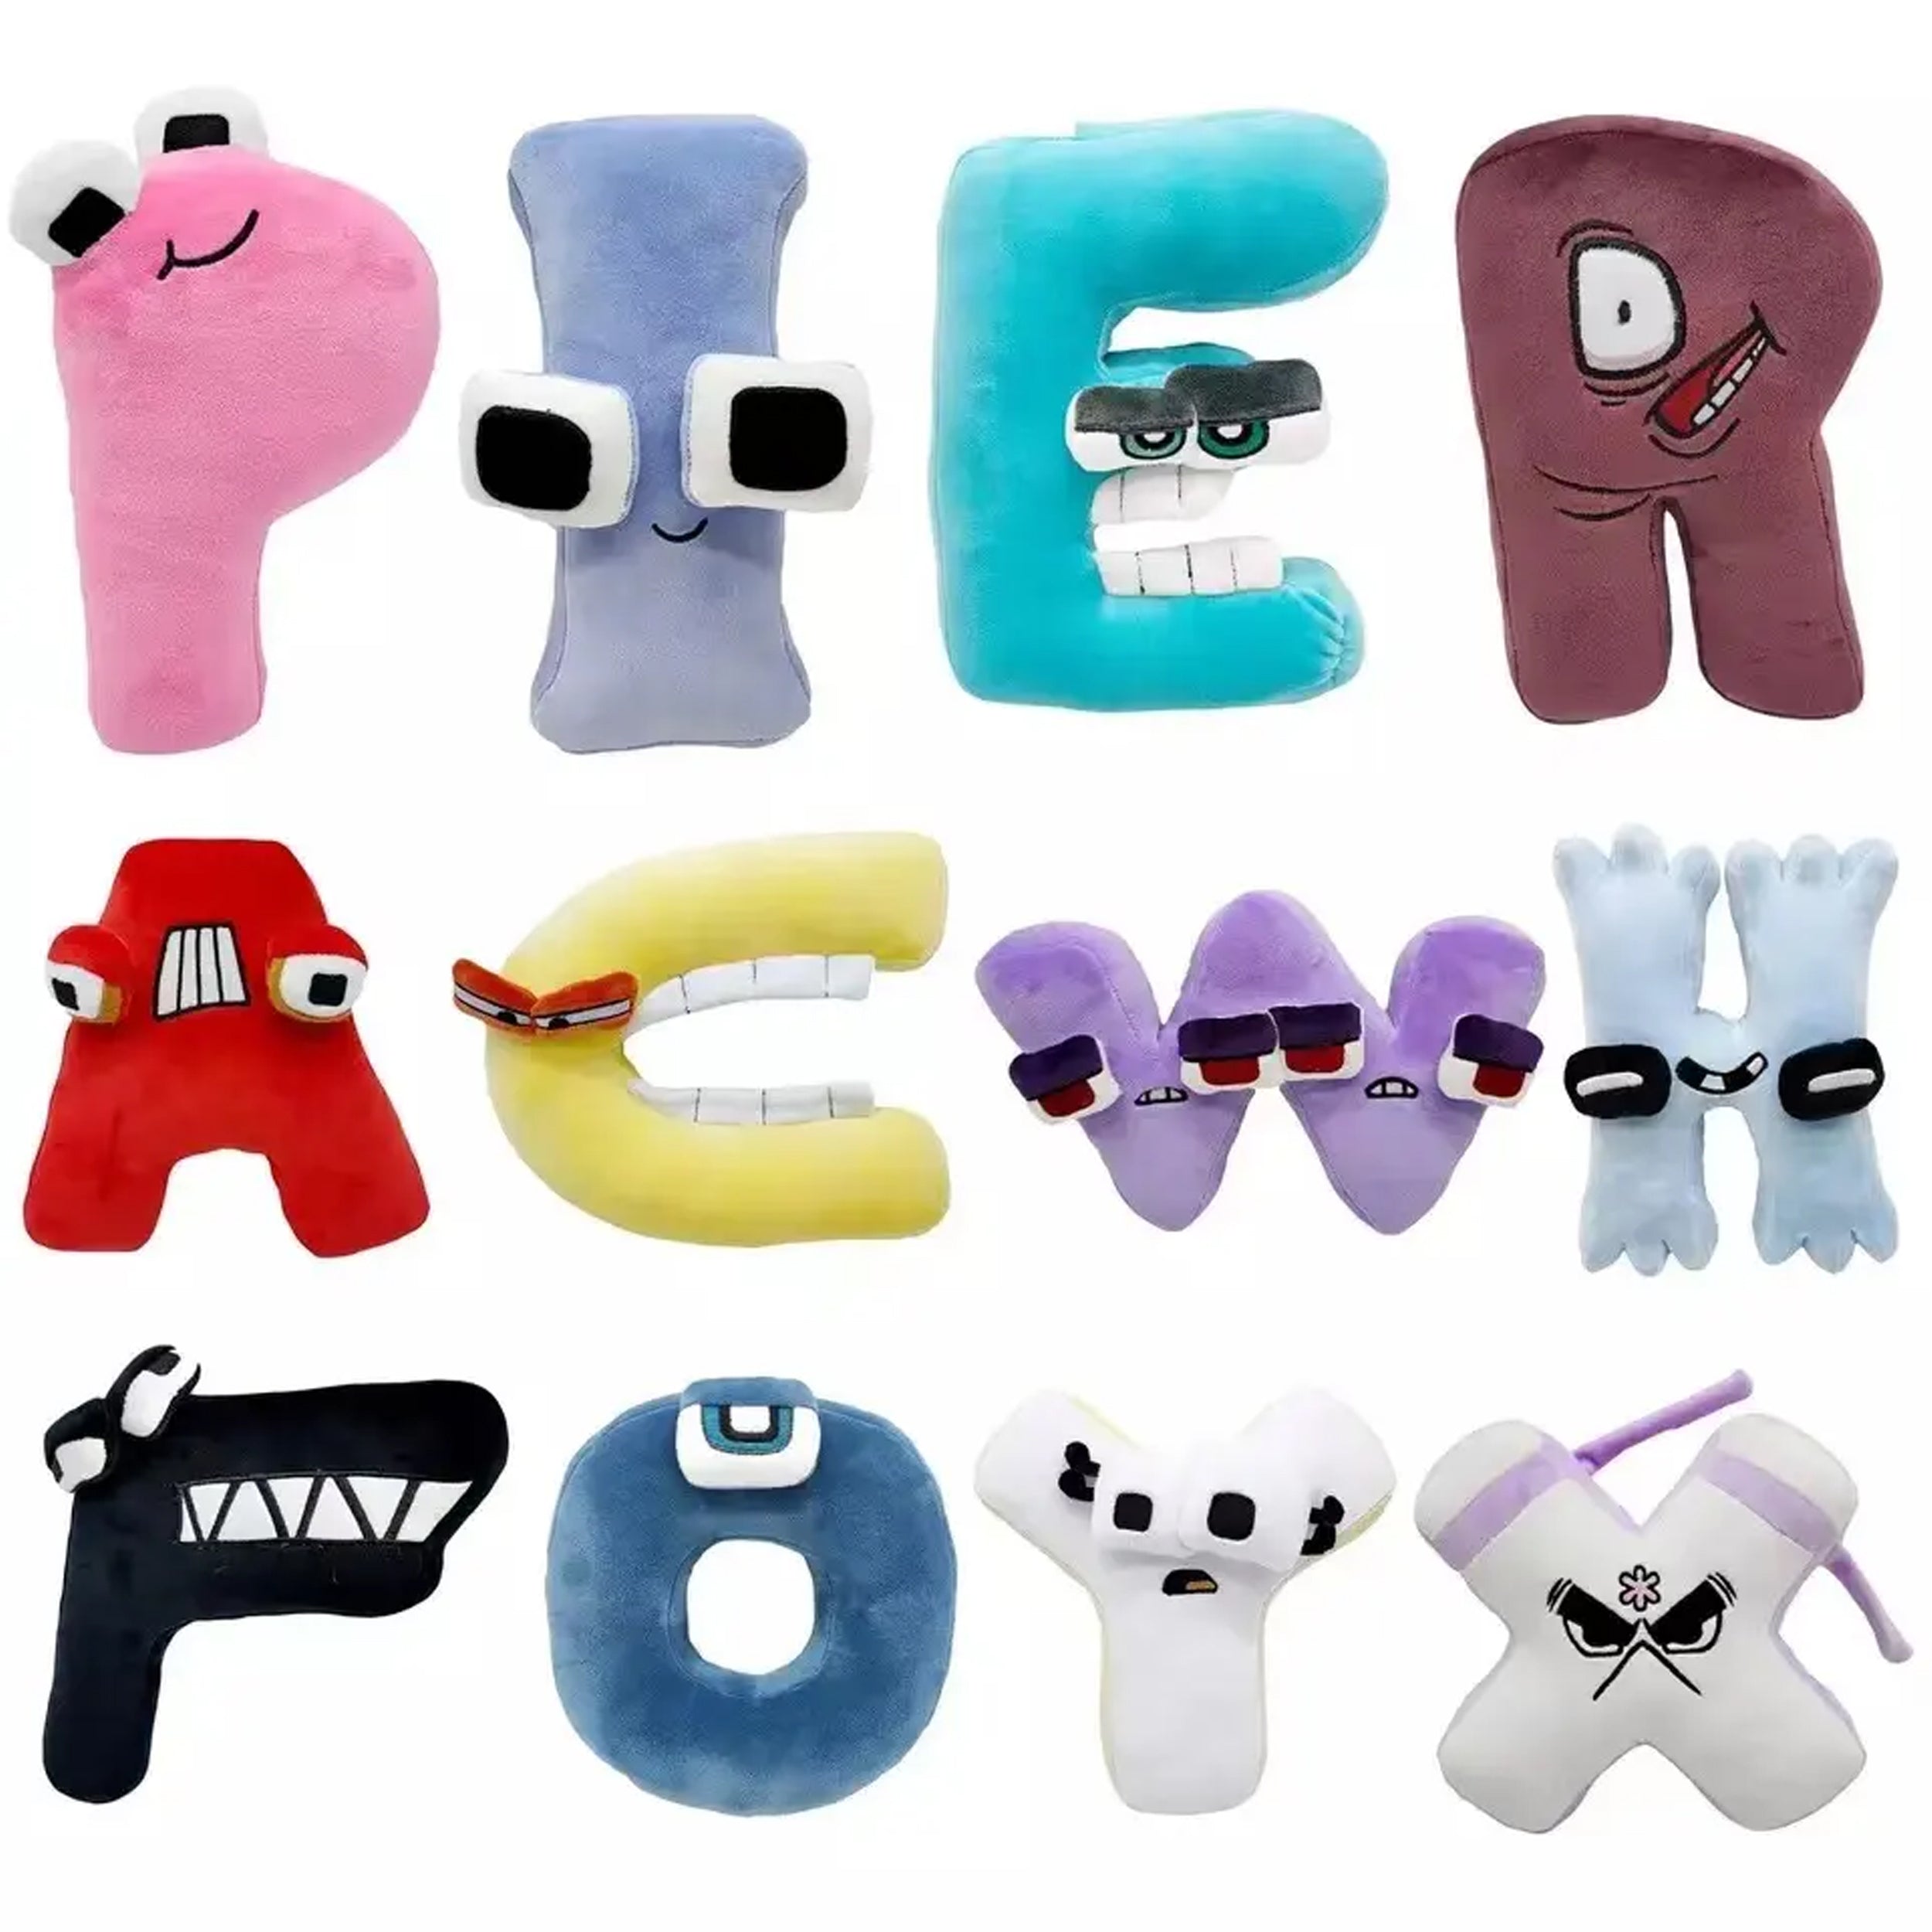 Alphabet Lore But are Plush Toy Stuffed Animal Plushie Doll Toys Gift for  Kids Children Montessori Christmas Gift Toy 26 Letter